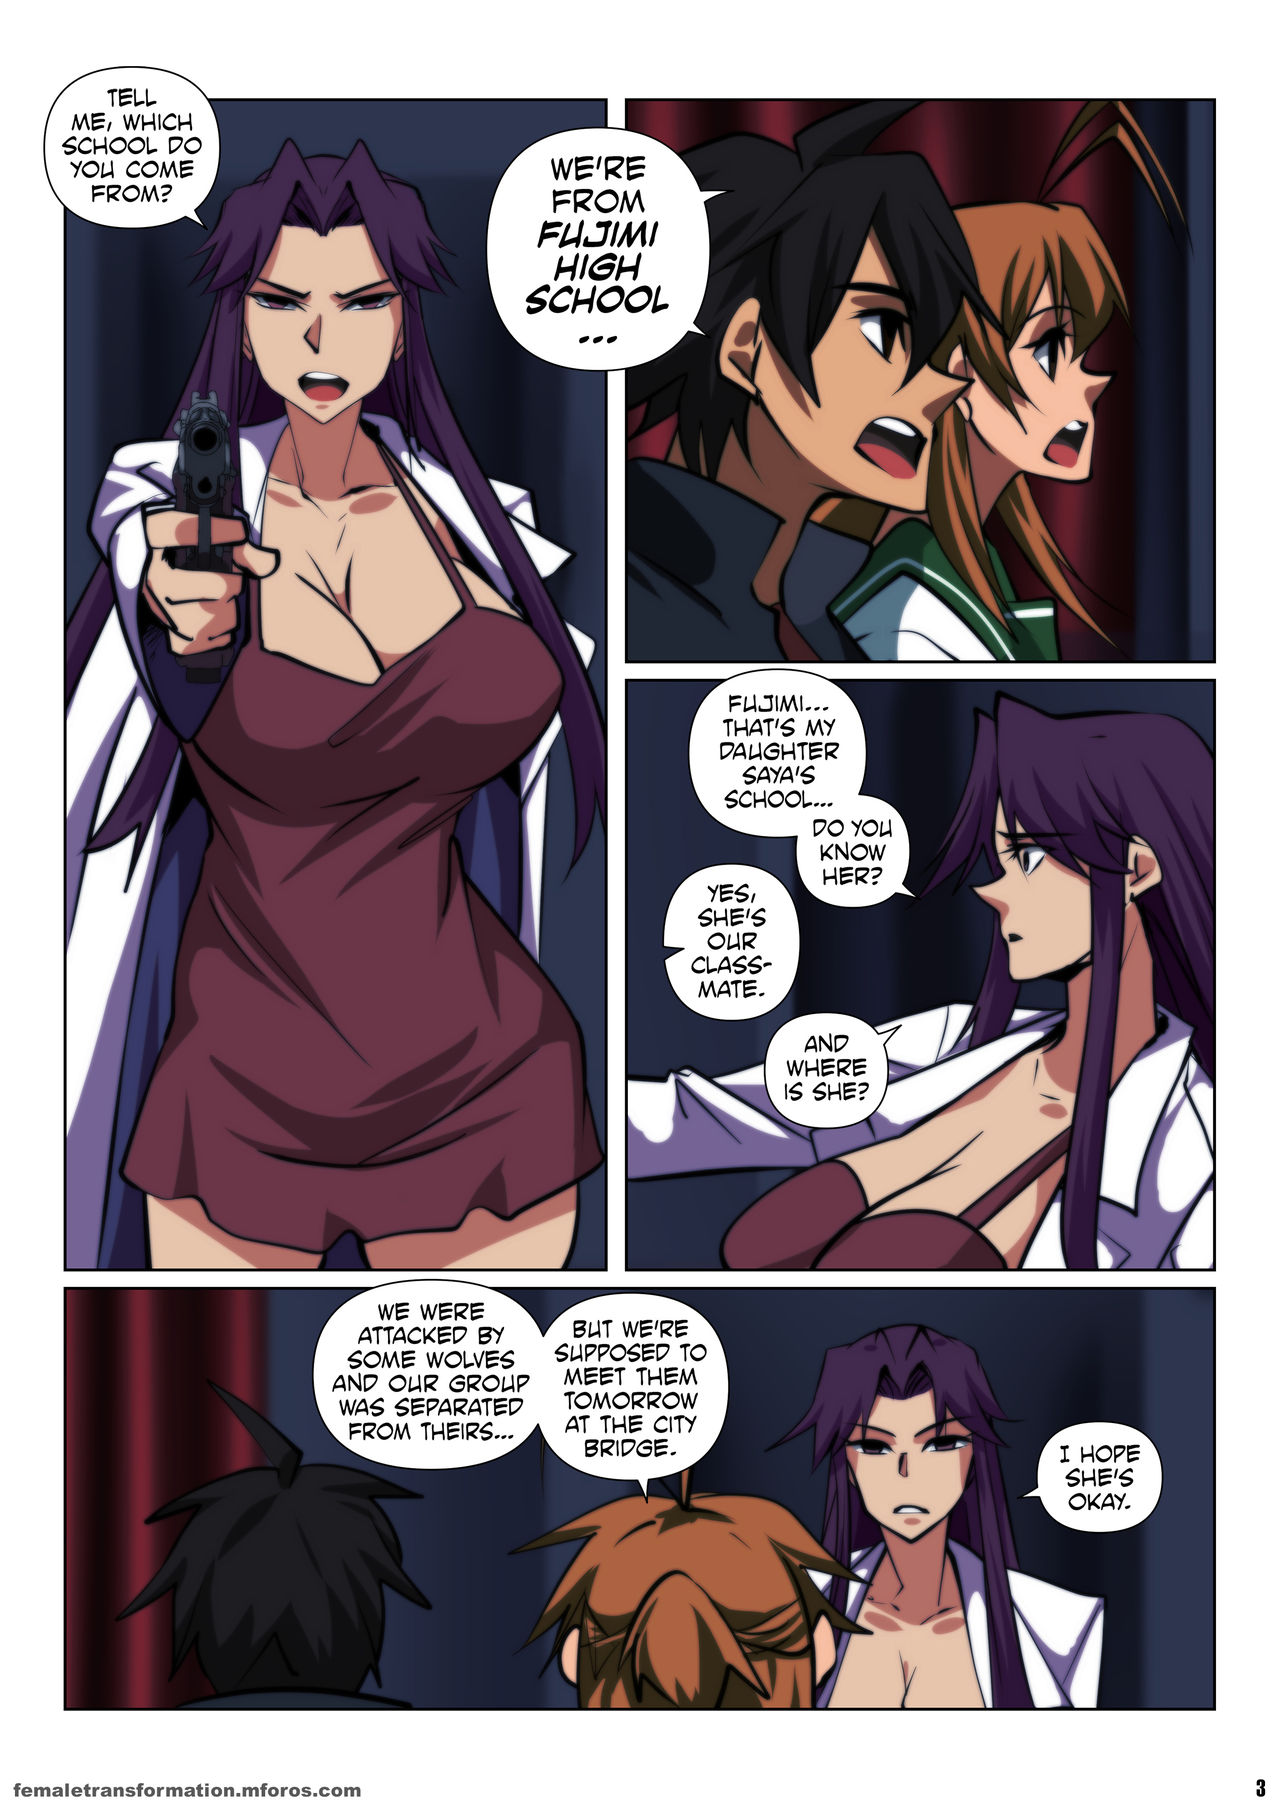 H.O.T.W. High School of the Werewolf - Page 4 - HentaiEra